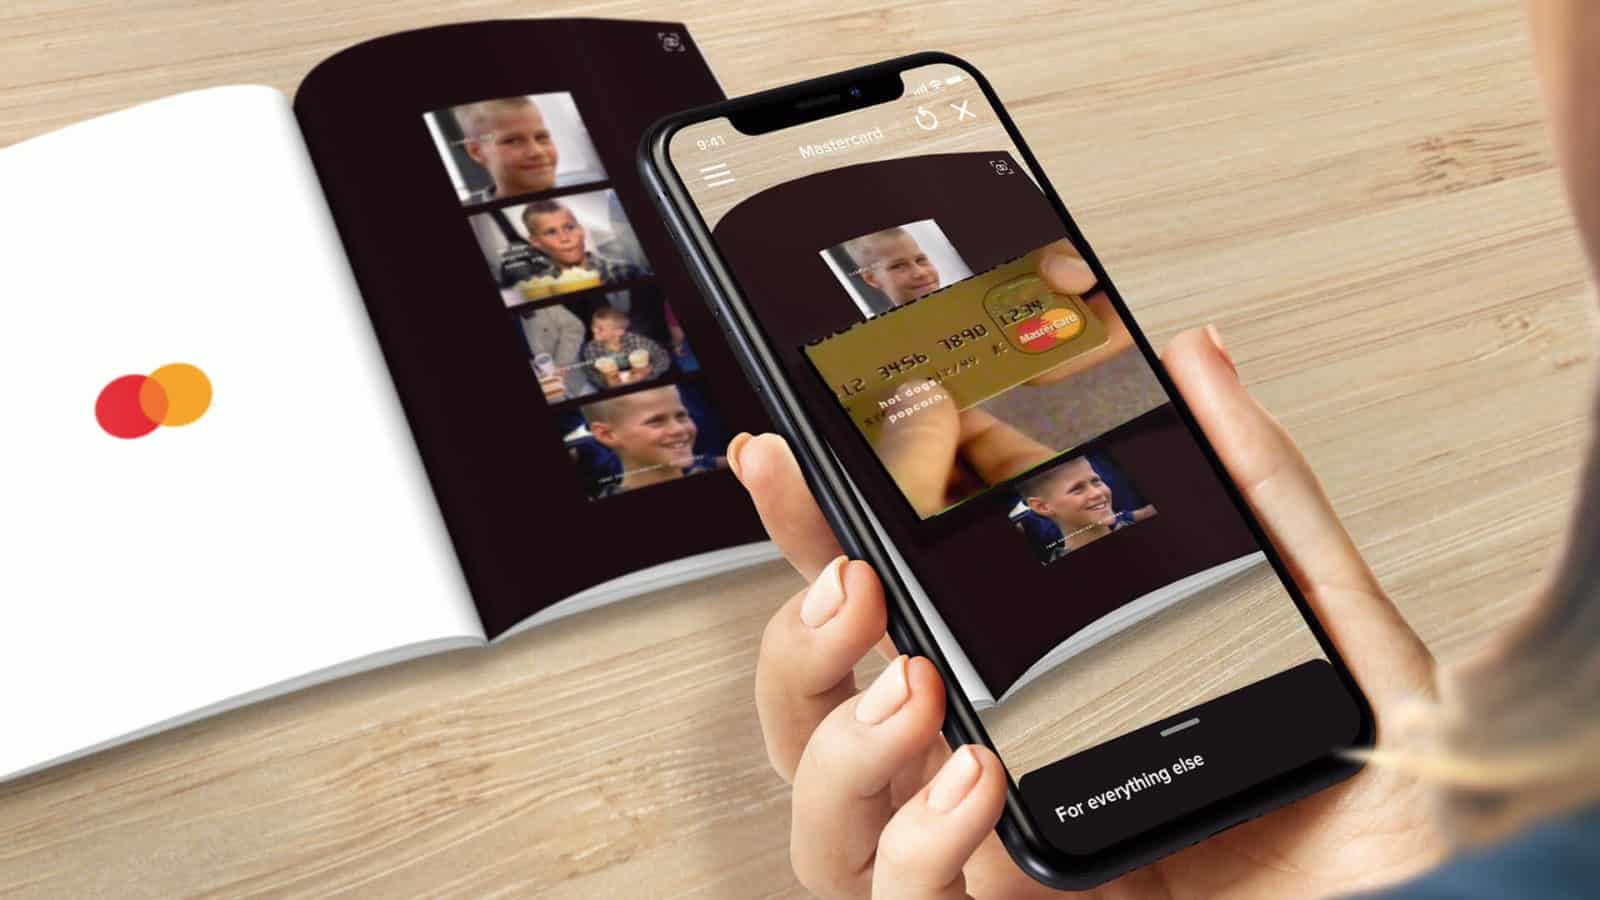 A phone being used to scan a Mastercard brochure revealing a gold card in AR.